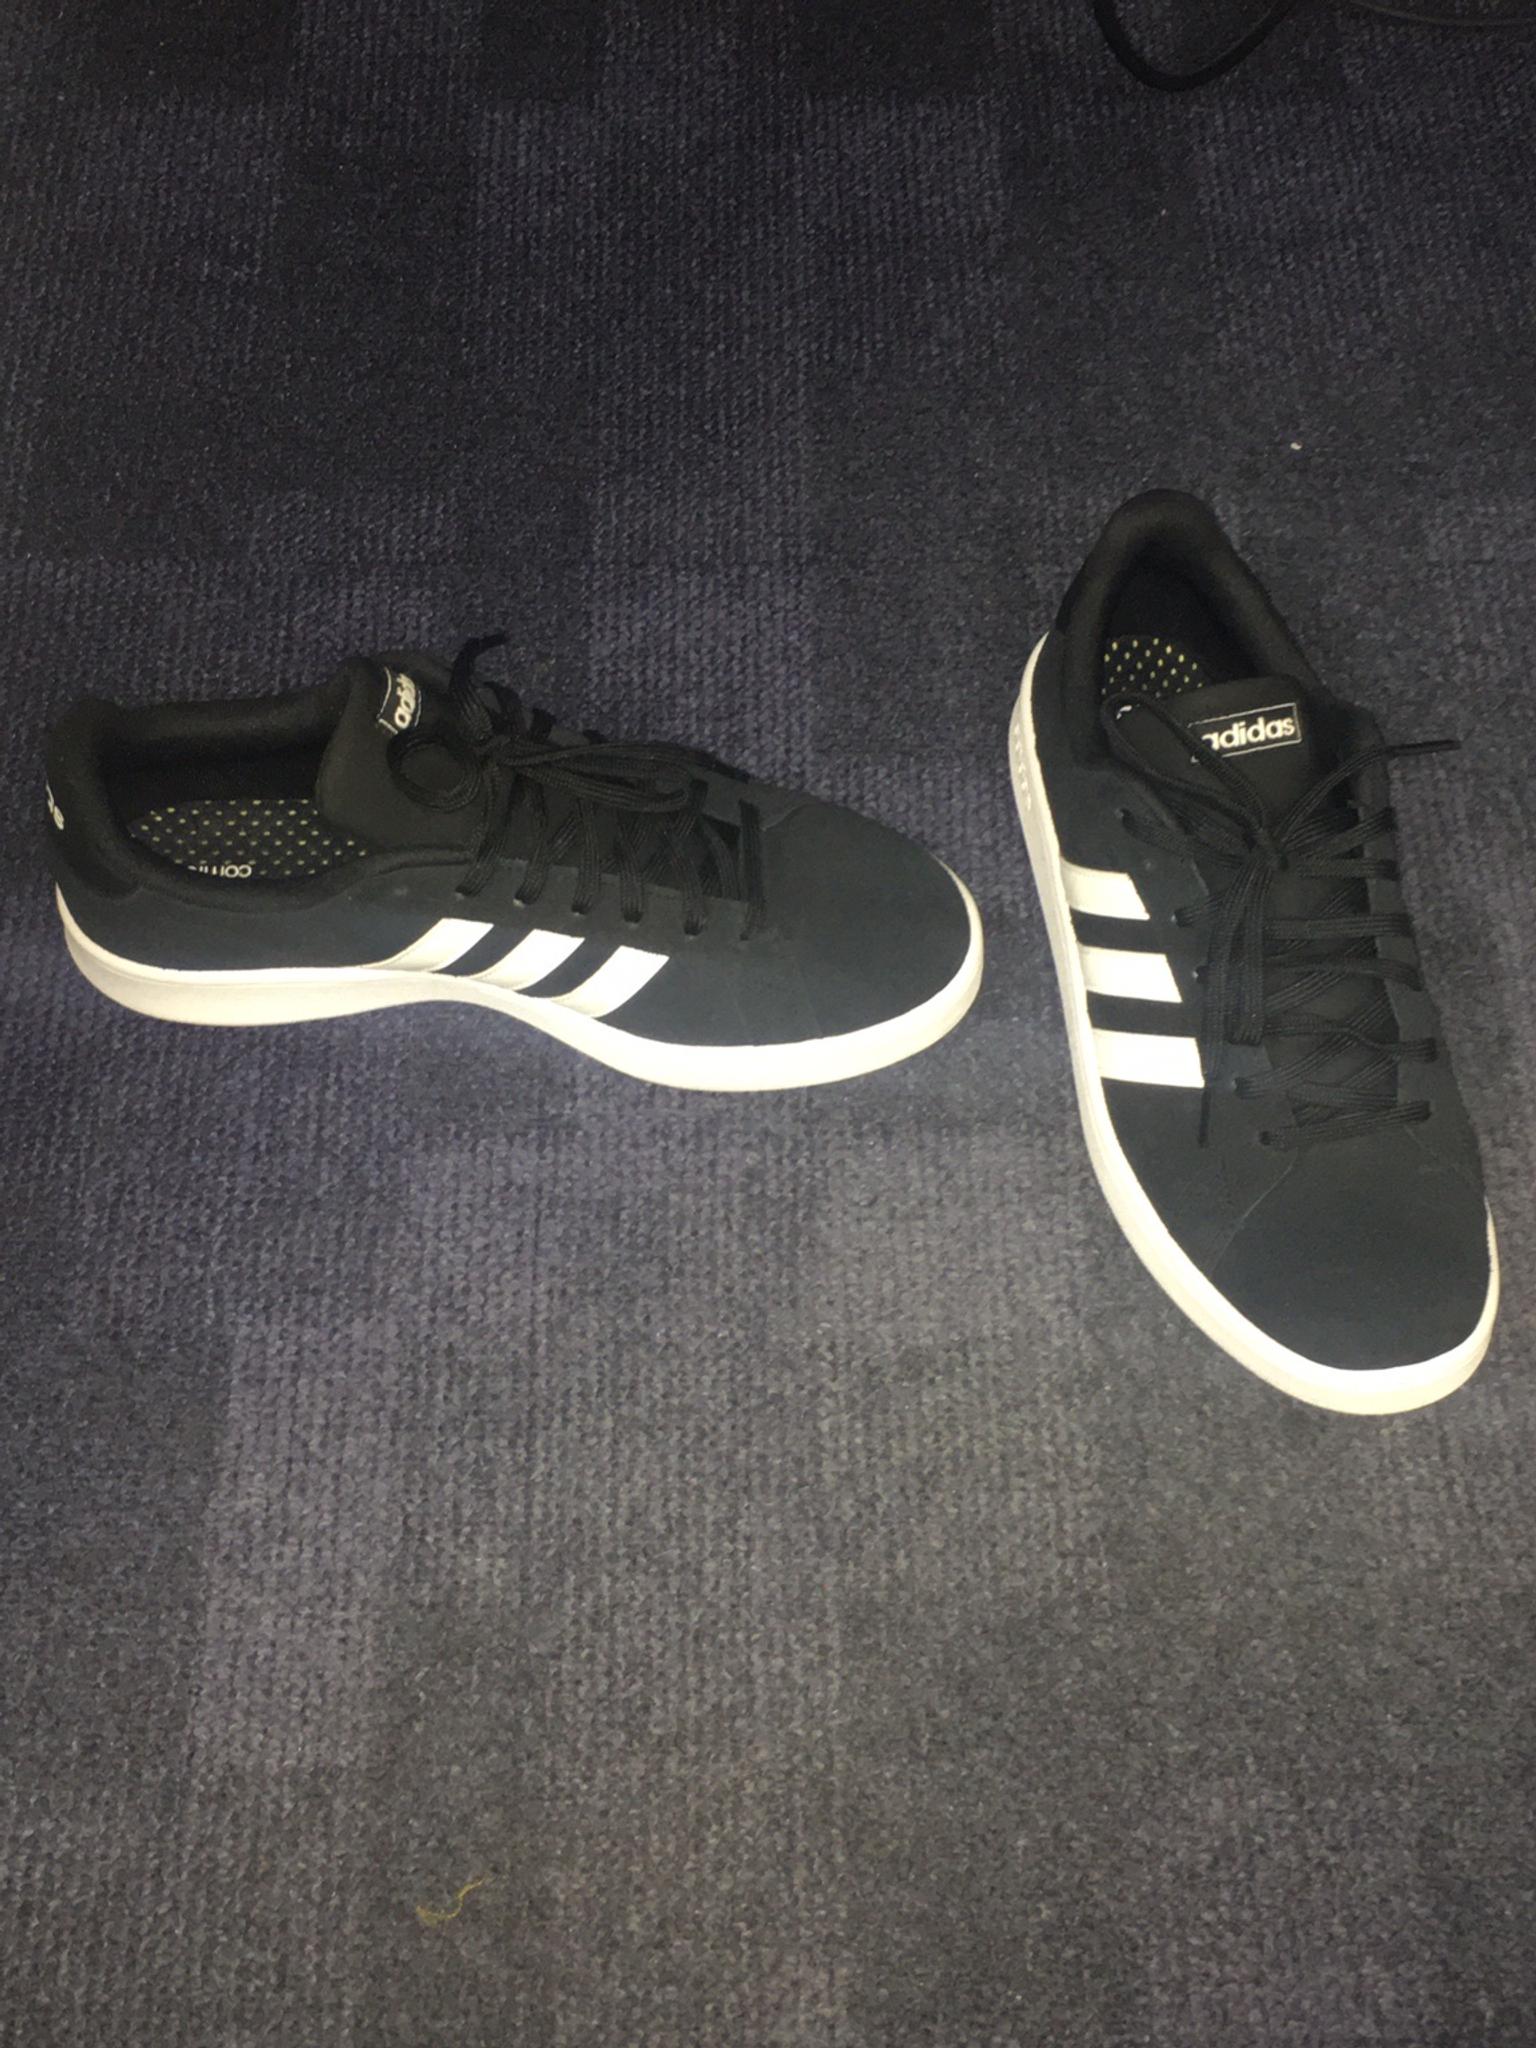 mens black adidas trainers size 9